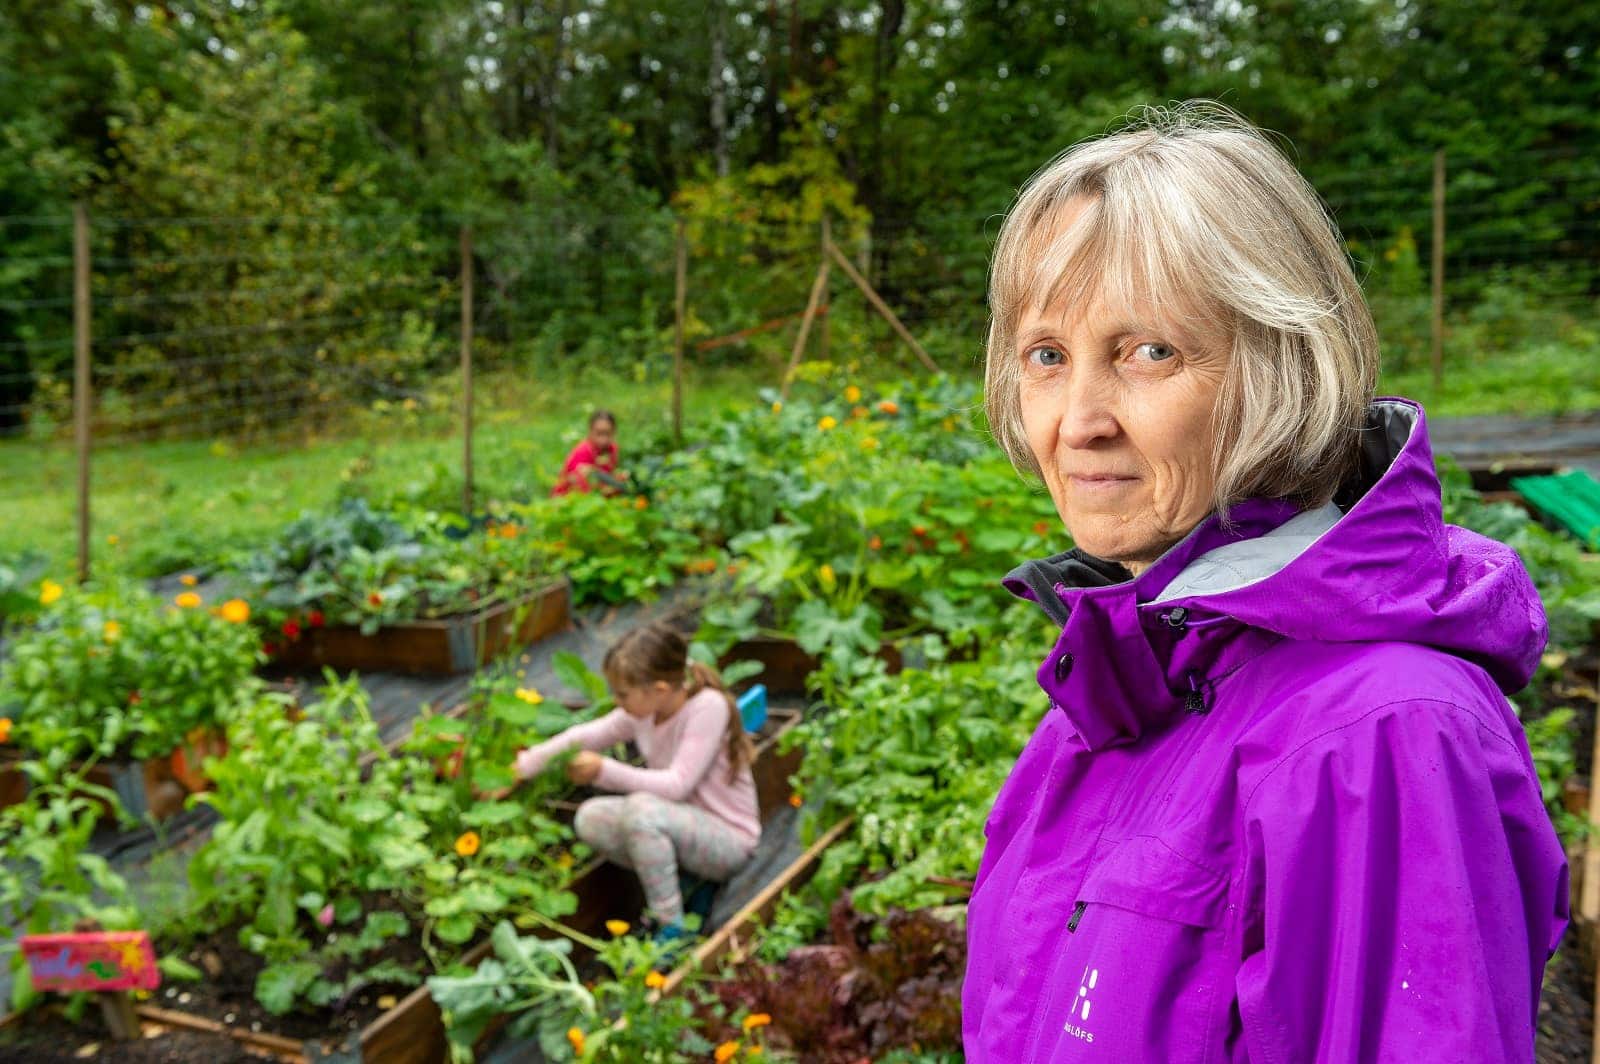 Susan Ursett, principal of the Tyrifjord videregaende skole in Norway, said she is very proud of her students. She is pictured in the school vegetable garden, which provides vegetables for the cooked lunch the students are served daily. [Photo: Tor Tjeransen/ADAMS]